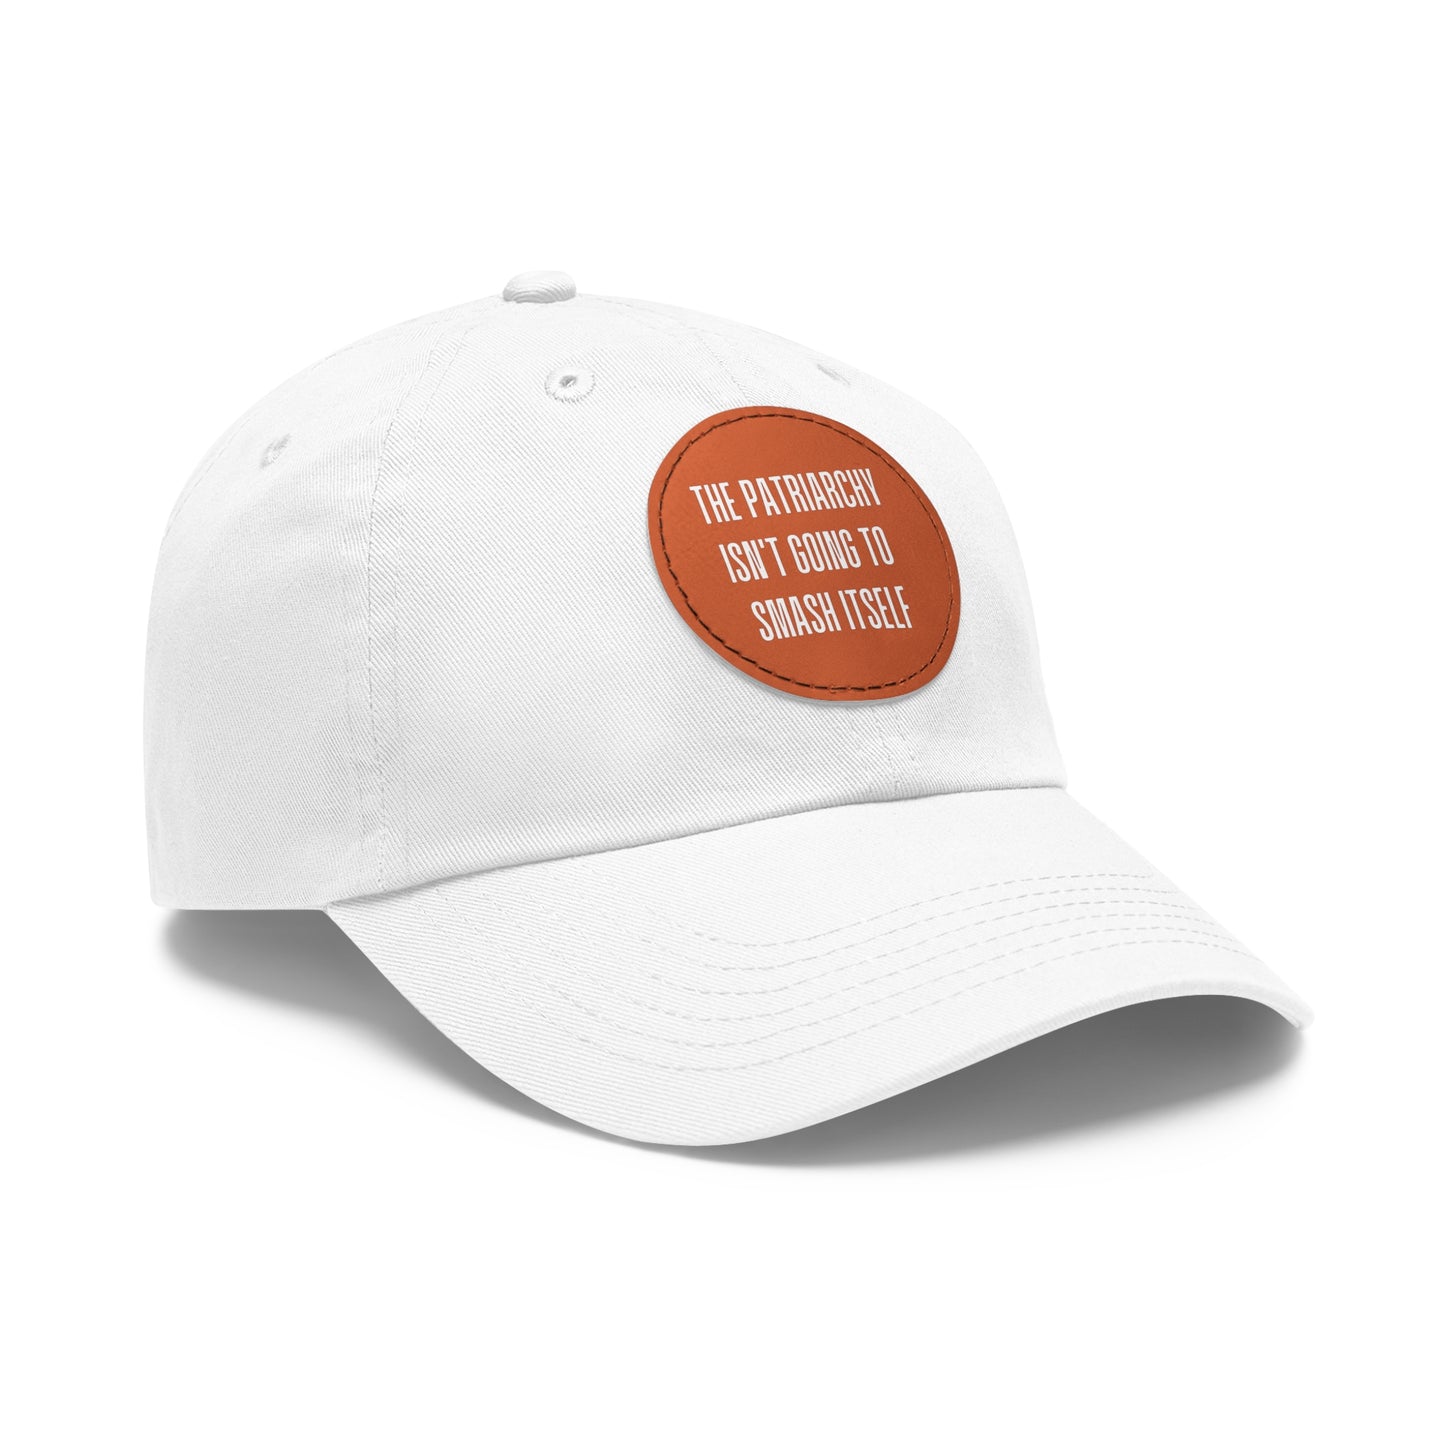 "The Patriarchy Isn't Going to Smash Itself" Feminist Hat